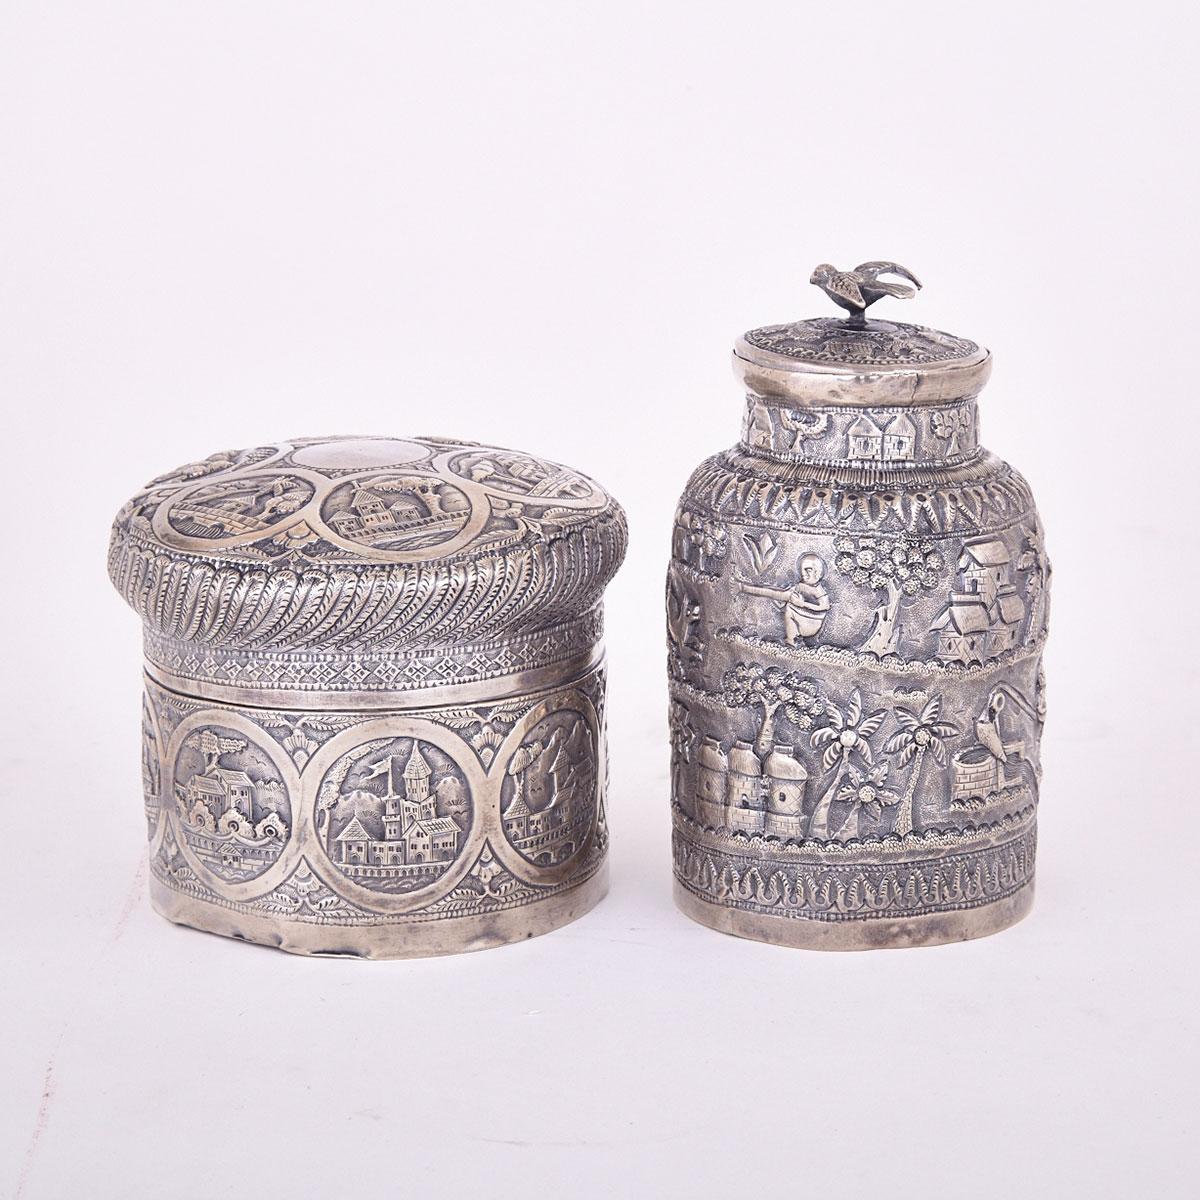 Two Burmese Silver Covered Jars, late 19th/early 20th century